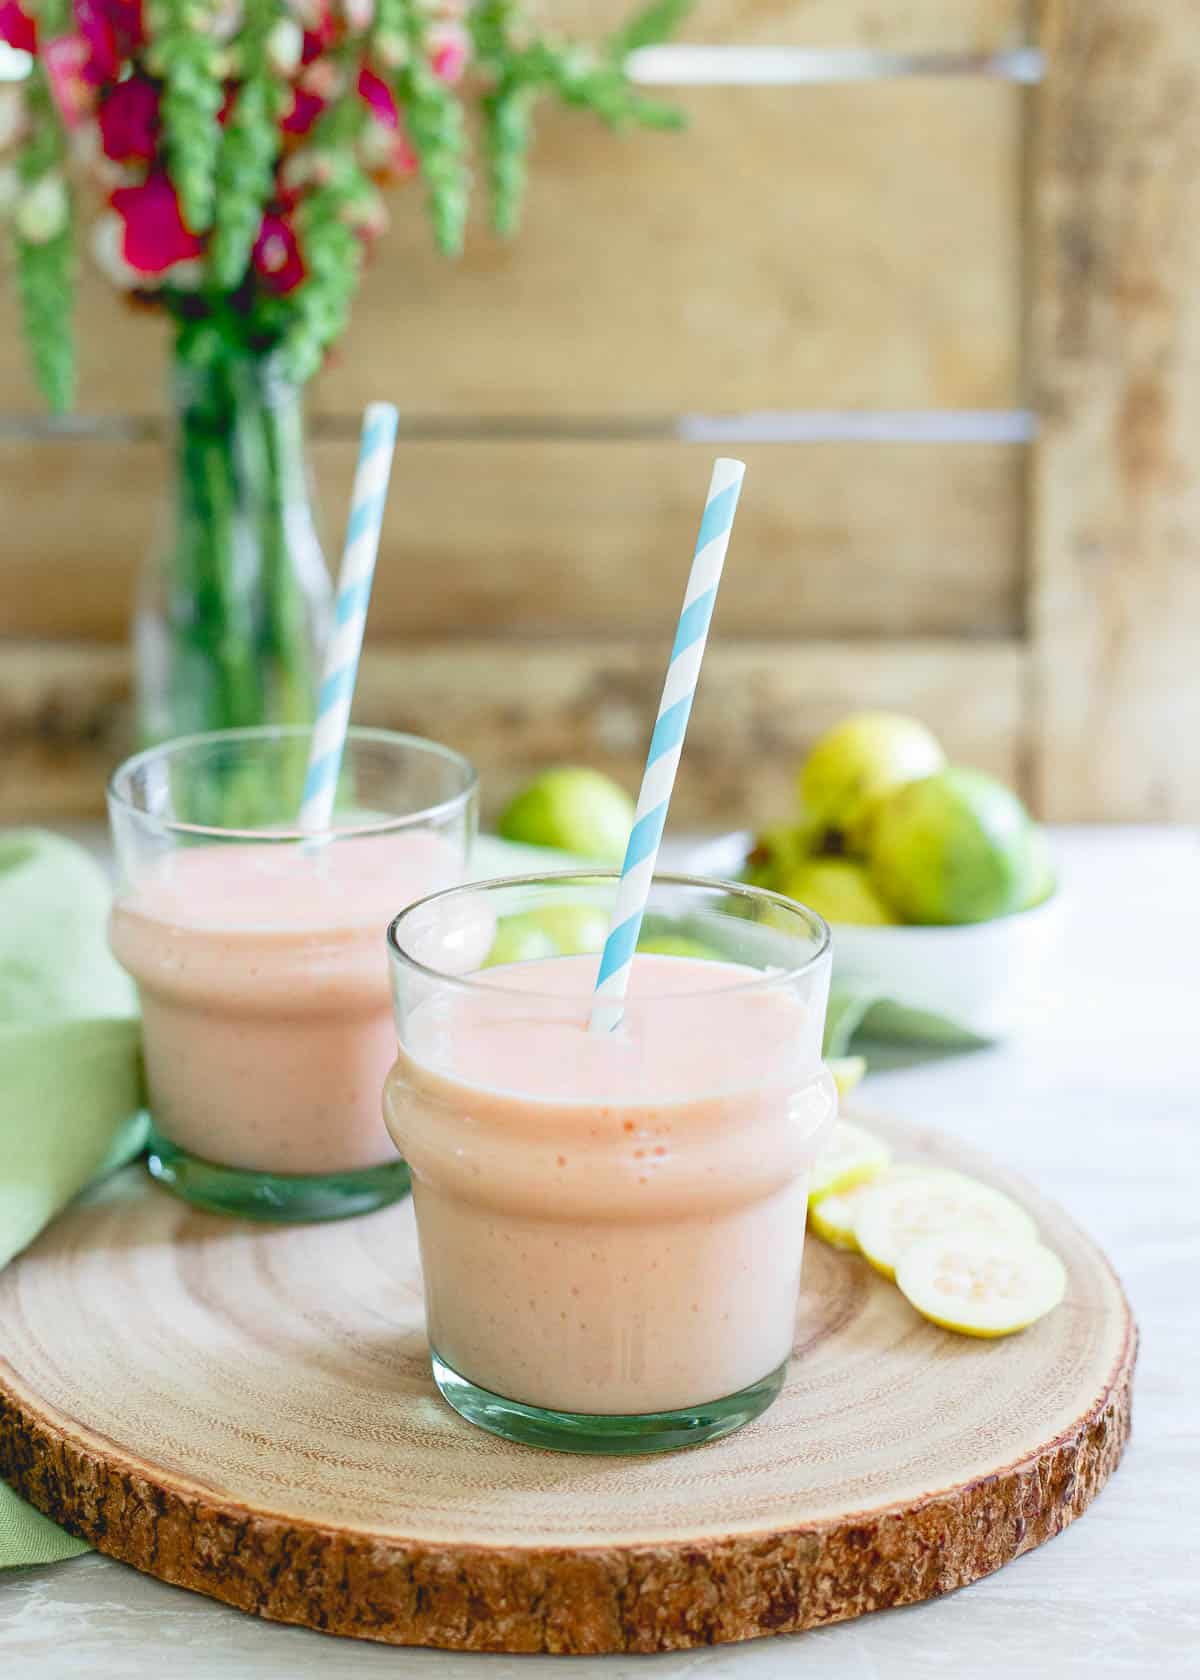 This simple guava pineapple smoothie is made with light coconut milk and a few frozen strawberries for a refreshing dairy-free summer drink.